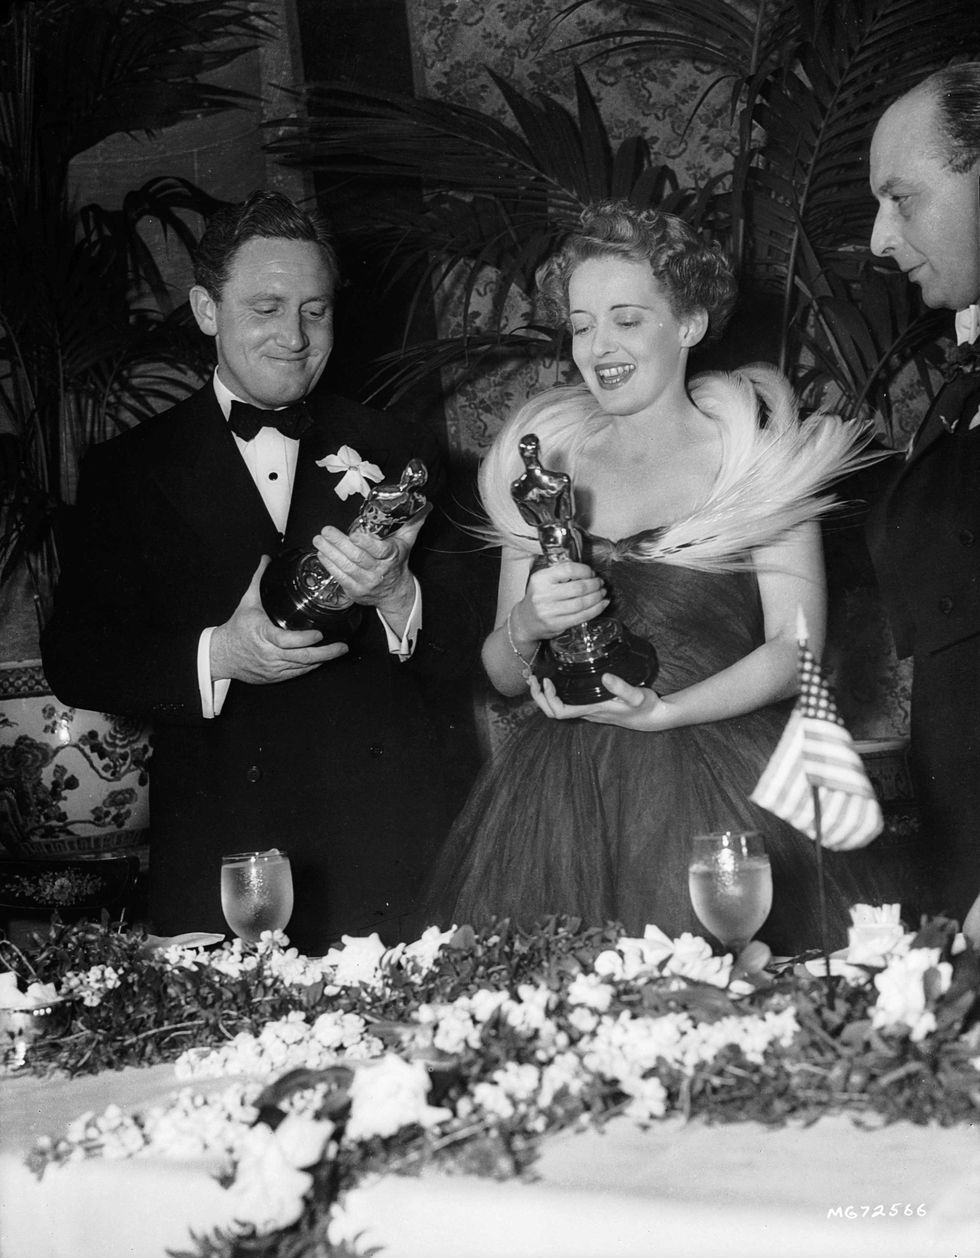 <p>To accept her Best Actress award for <i data-redactor-tag="i">Jezebel</i>, Bette Davis opted for&nbsp;a&nbsp;simple frock with a tulle skirt and a dramatic feathered neckline. Spencer Tracy, picking up his Best Actor award for <i data-redactor-tag="i">Boys Town</i>, wore a black tuxedo, of course.<span class="redactor-invisible-space" data-verified="redactor" data-redactor-tag="span" data-redactor-class="redactor-invisible-space"></span></p>